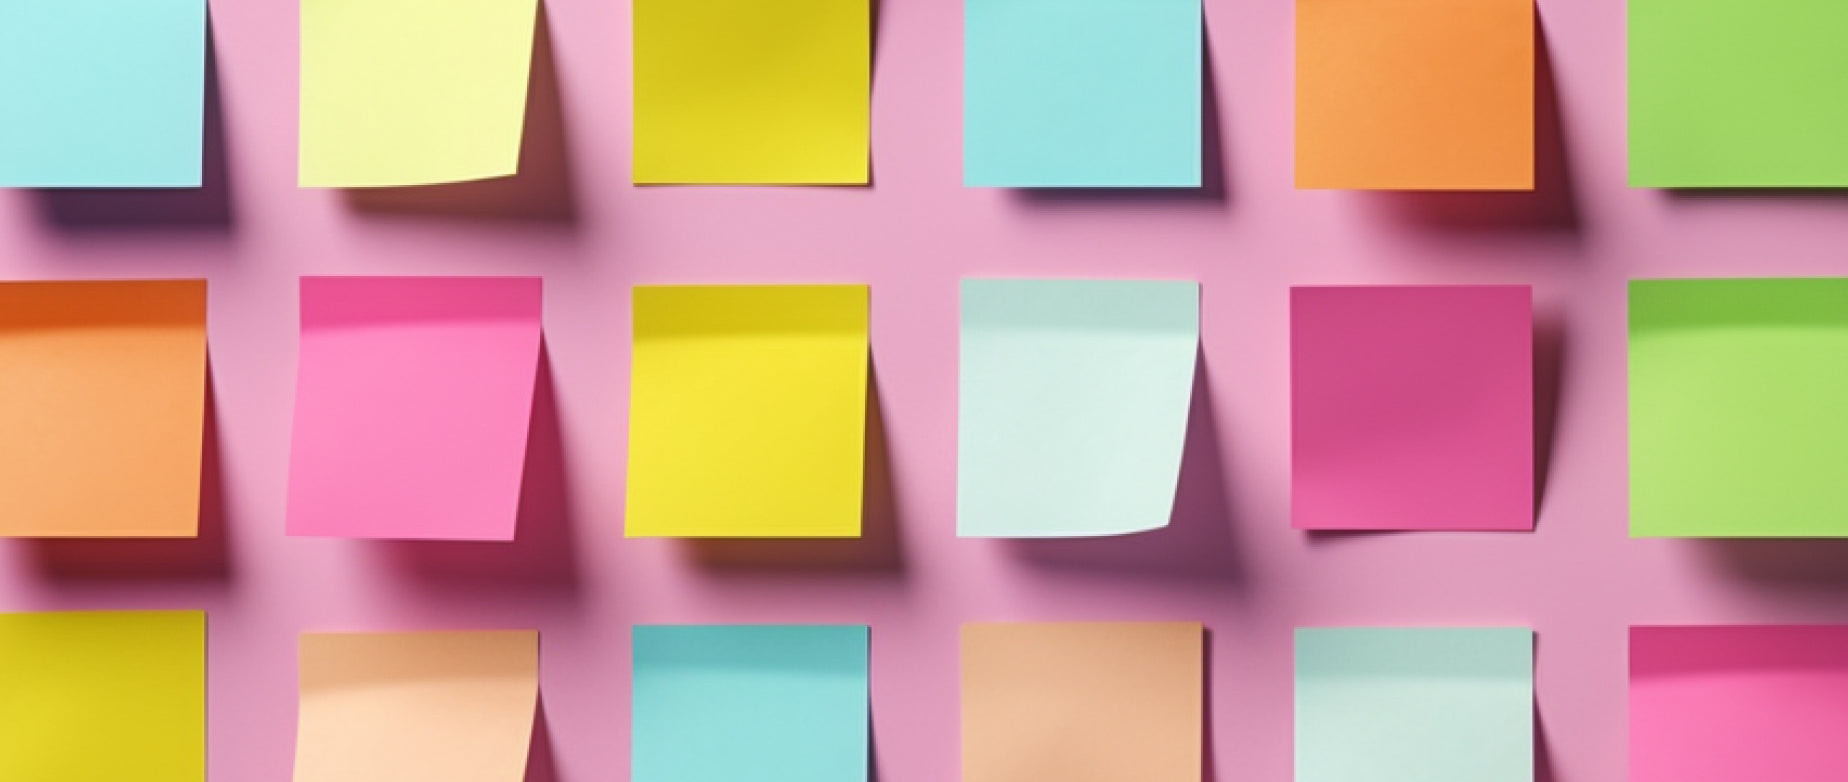 three rows of sticky notes of varying colors on a wall: product concept